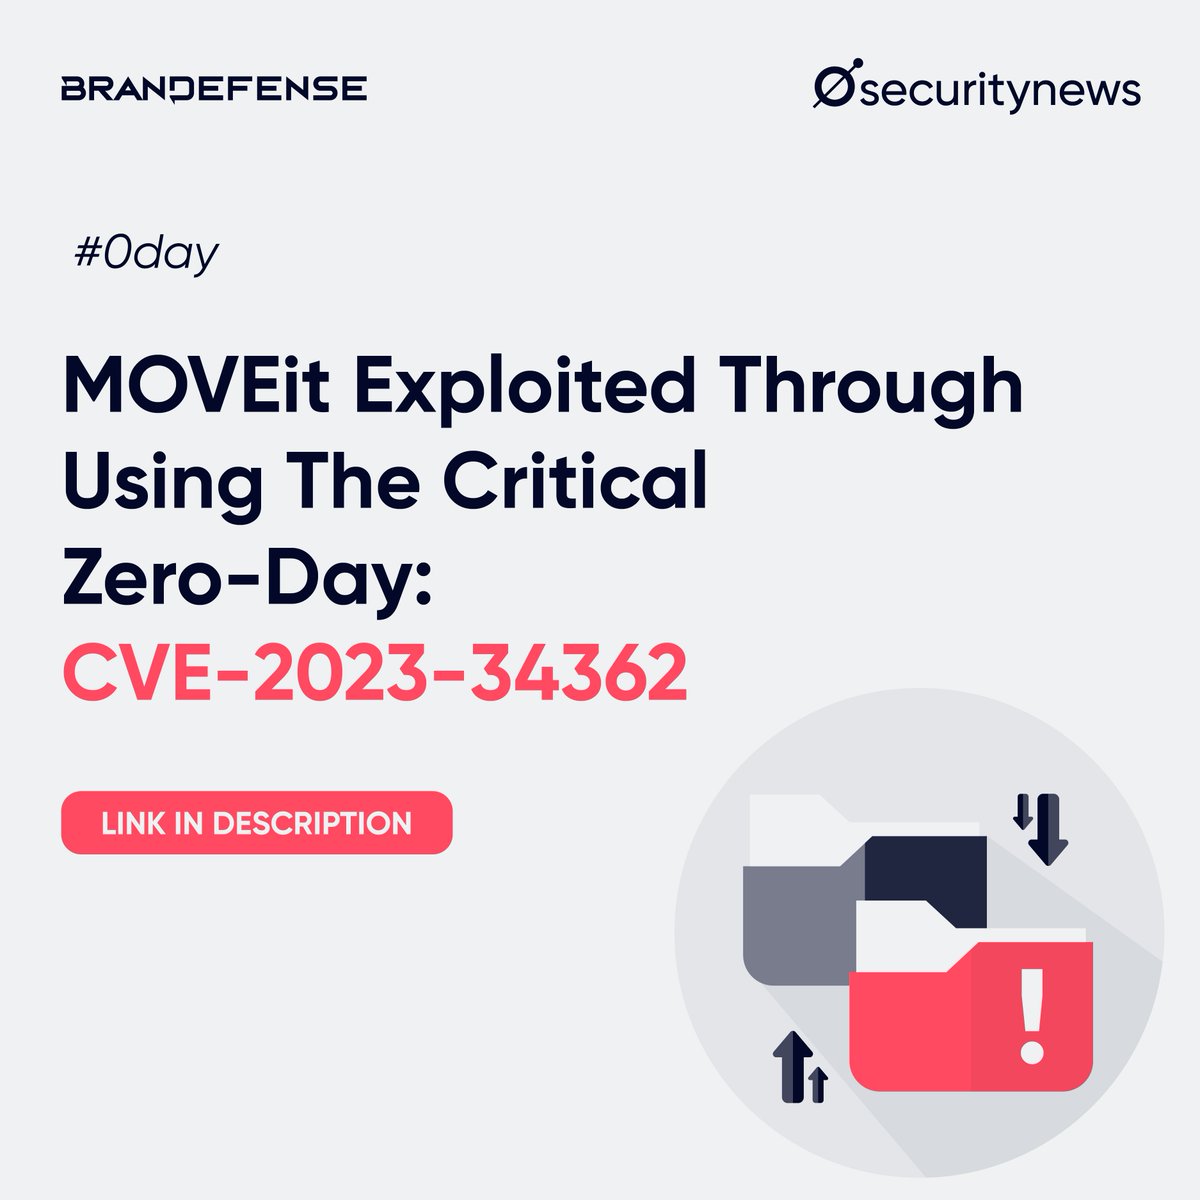 #MOVEit has been hit by a major #cybersecurity vulnerability, identified as CVE-2023-34362, exploited by unknown hackers to conduct zero-day attacks. #Microsoft has attributed the attacks to the Lace Tempest. Details: eu1.hubs.ly/H03-Vzw0 #securitynews  #0day #moveit #cve